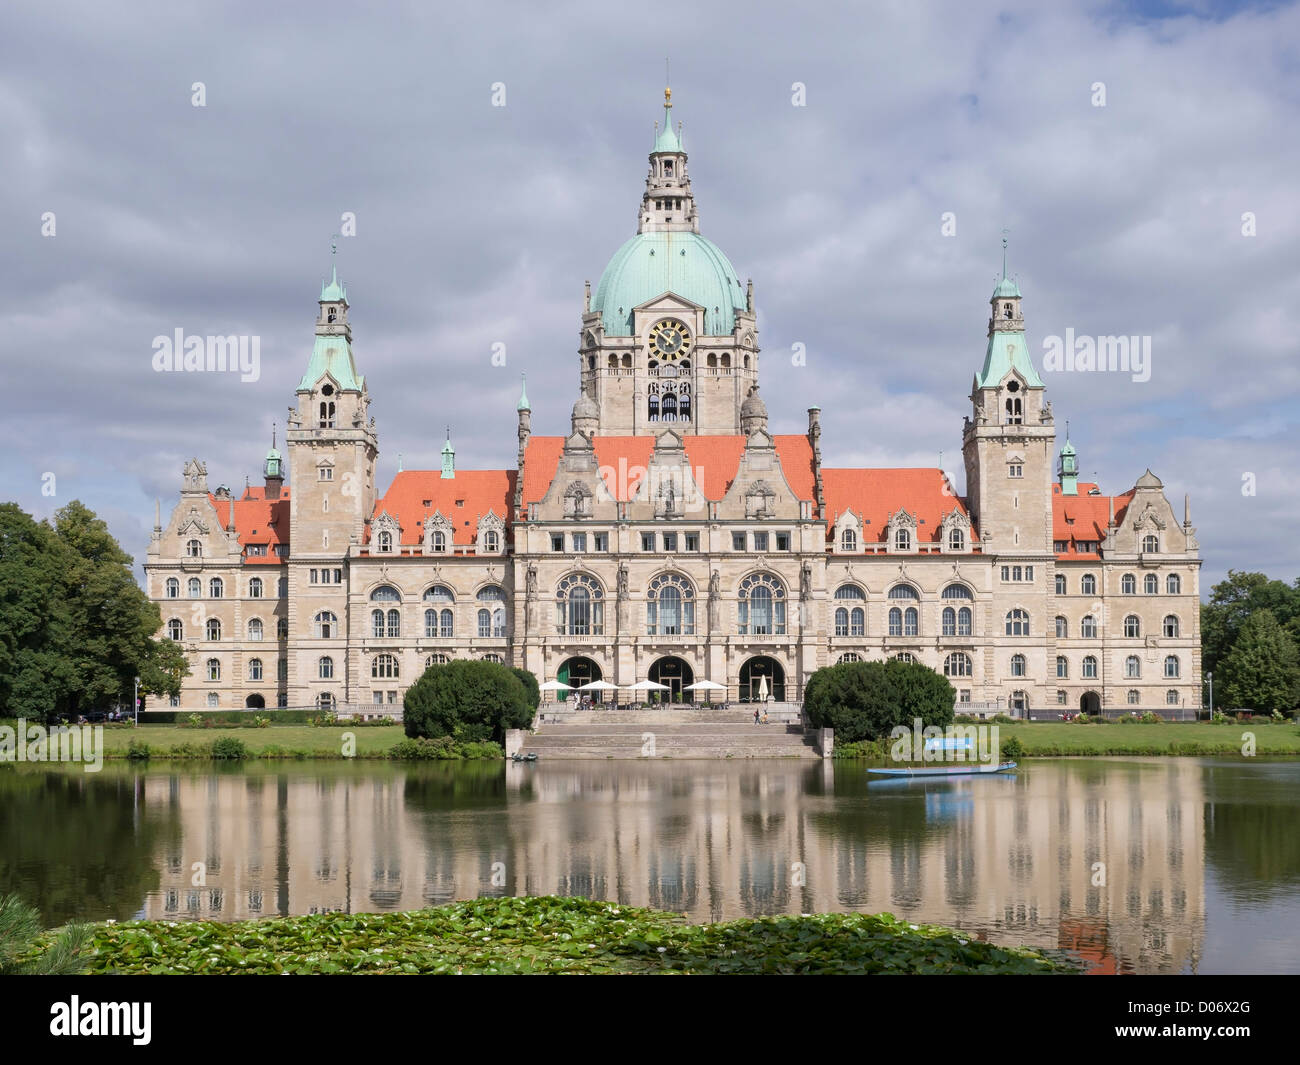 The Neues Rathaus (new city hall) in Hannover, Germany. It is set in a public park with trees and a large lake. Stock Photo